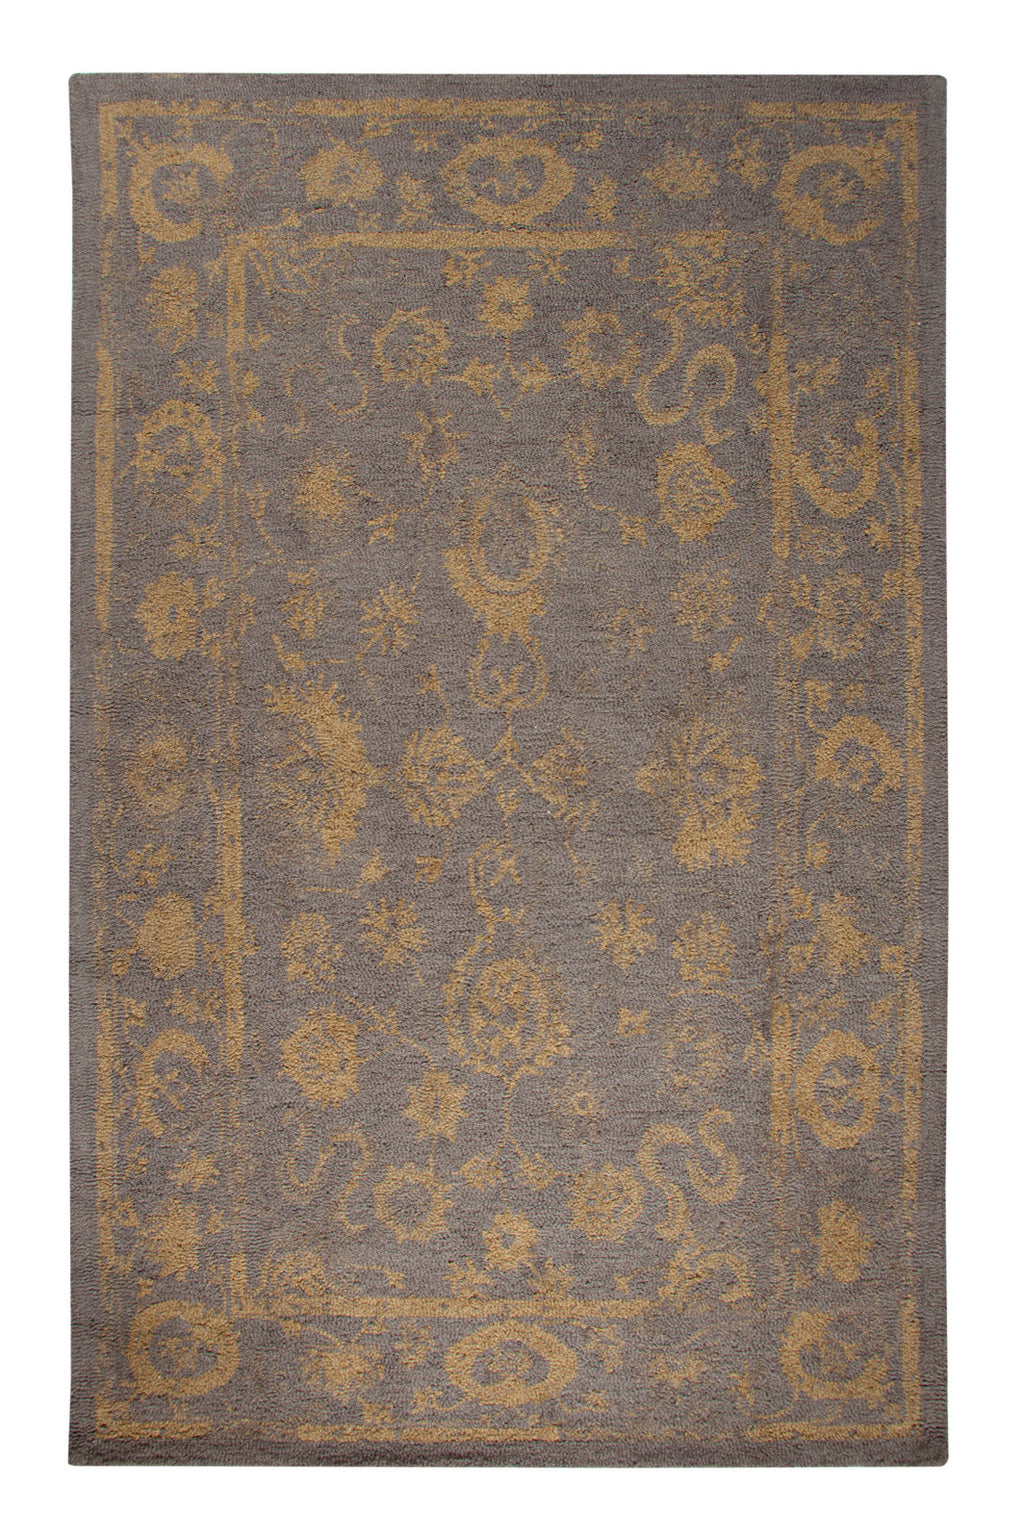 Dynamic Rugs Avalon 88800 Brown/Gold Area Rug main image